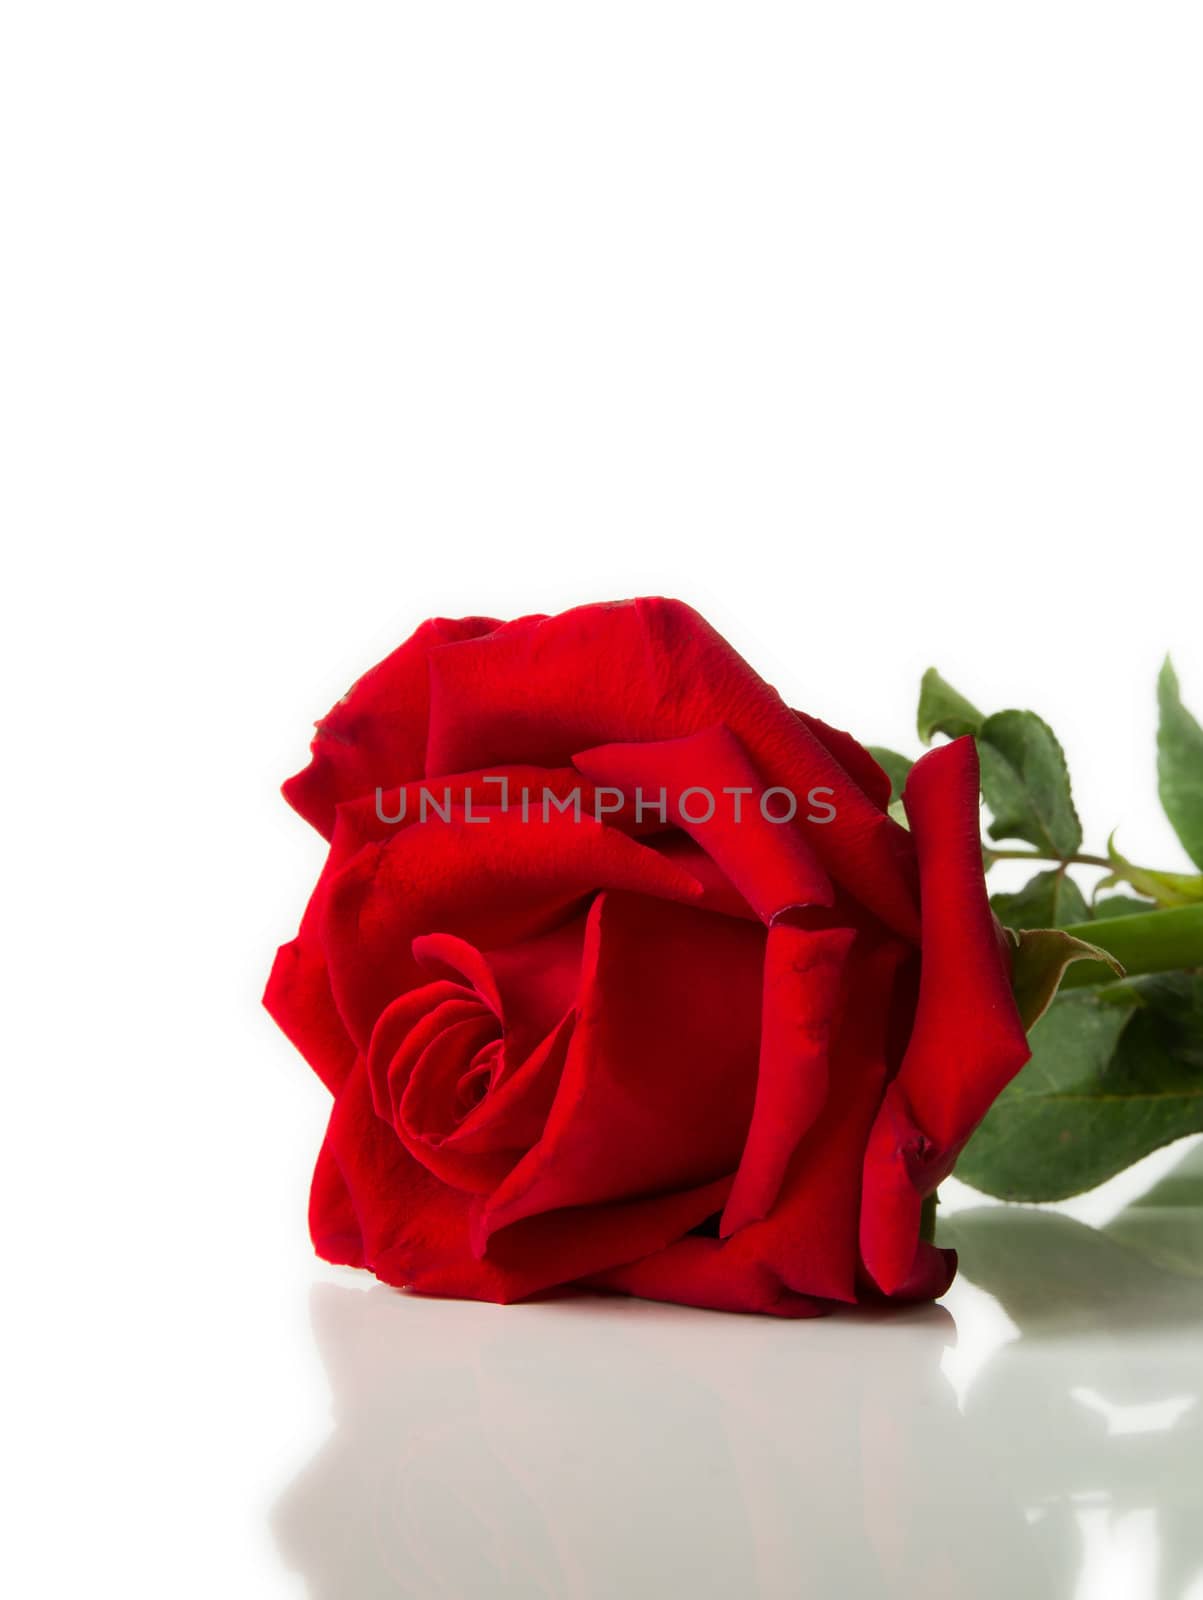 Red rose laying on White background and Reflect floor